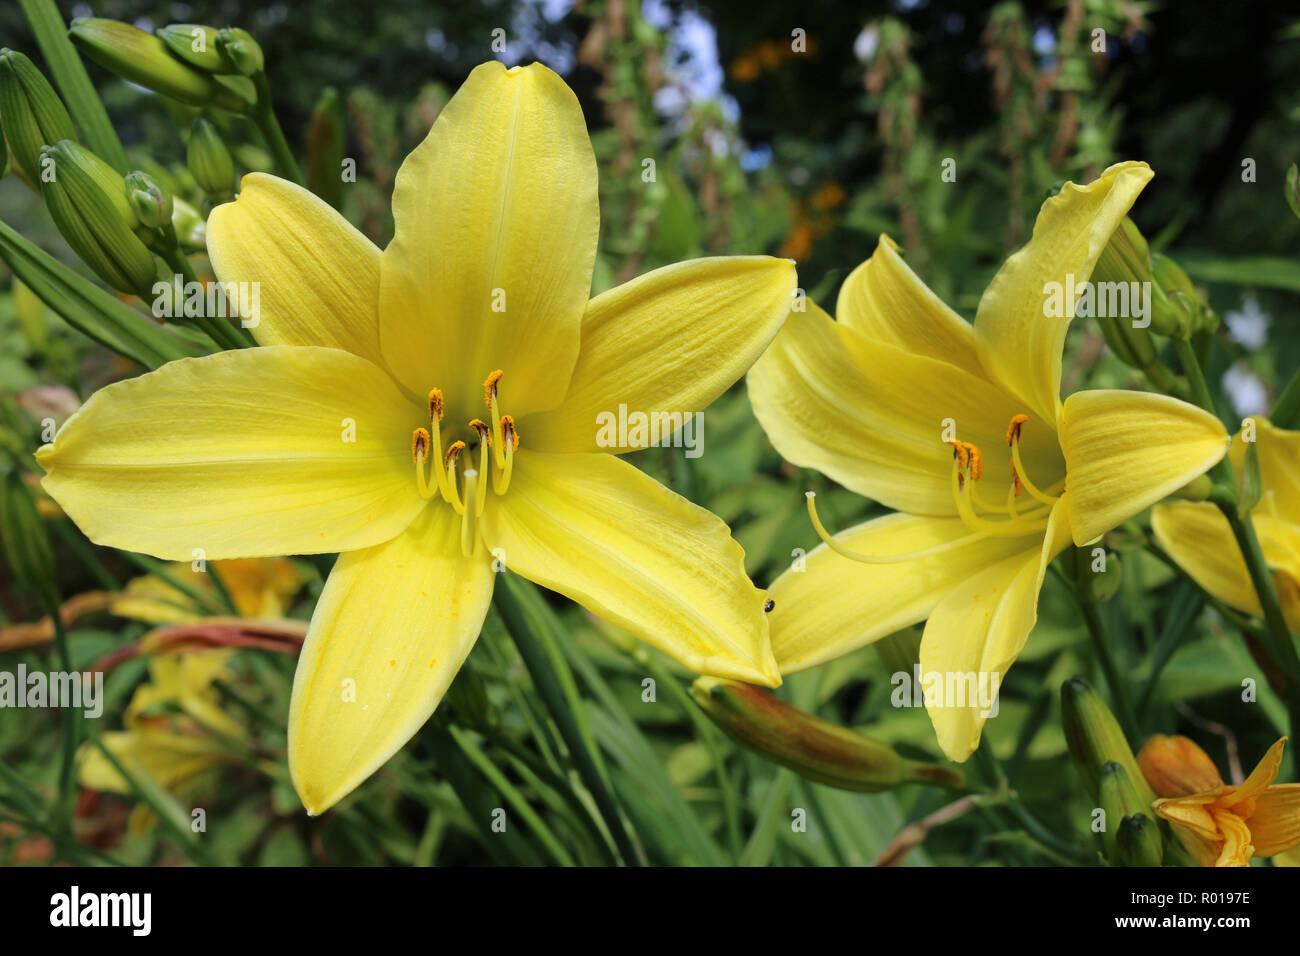 Two yellow daylily (Hemerocallis) flowers with a background of flowers and leaves of other daylilies. Stock Photo